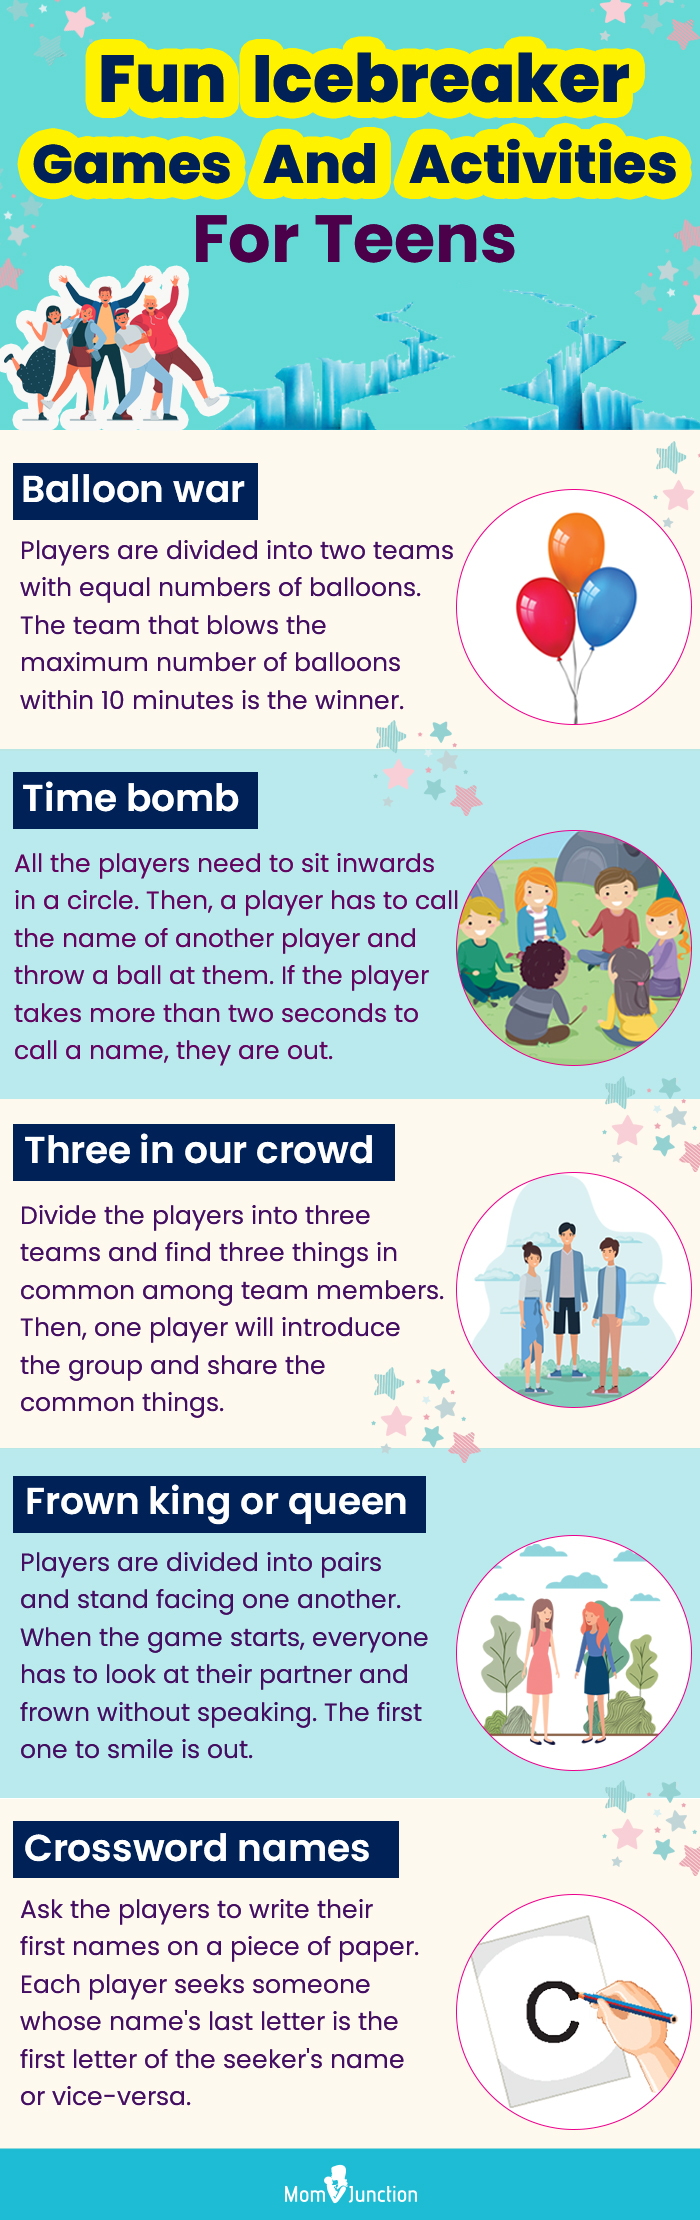 fun icebreaker games and activites for teens (infographic)